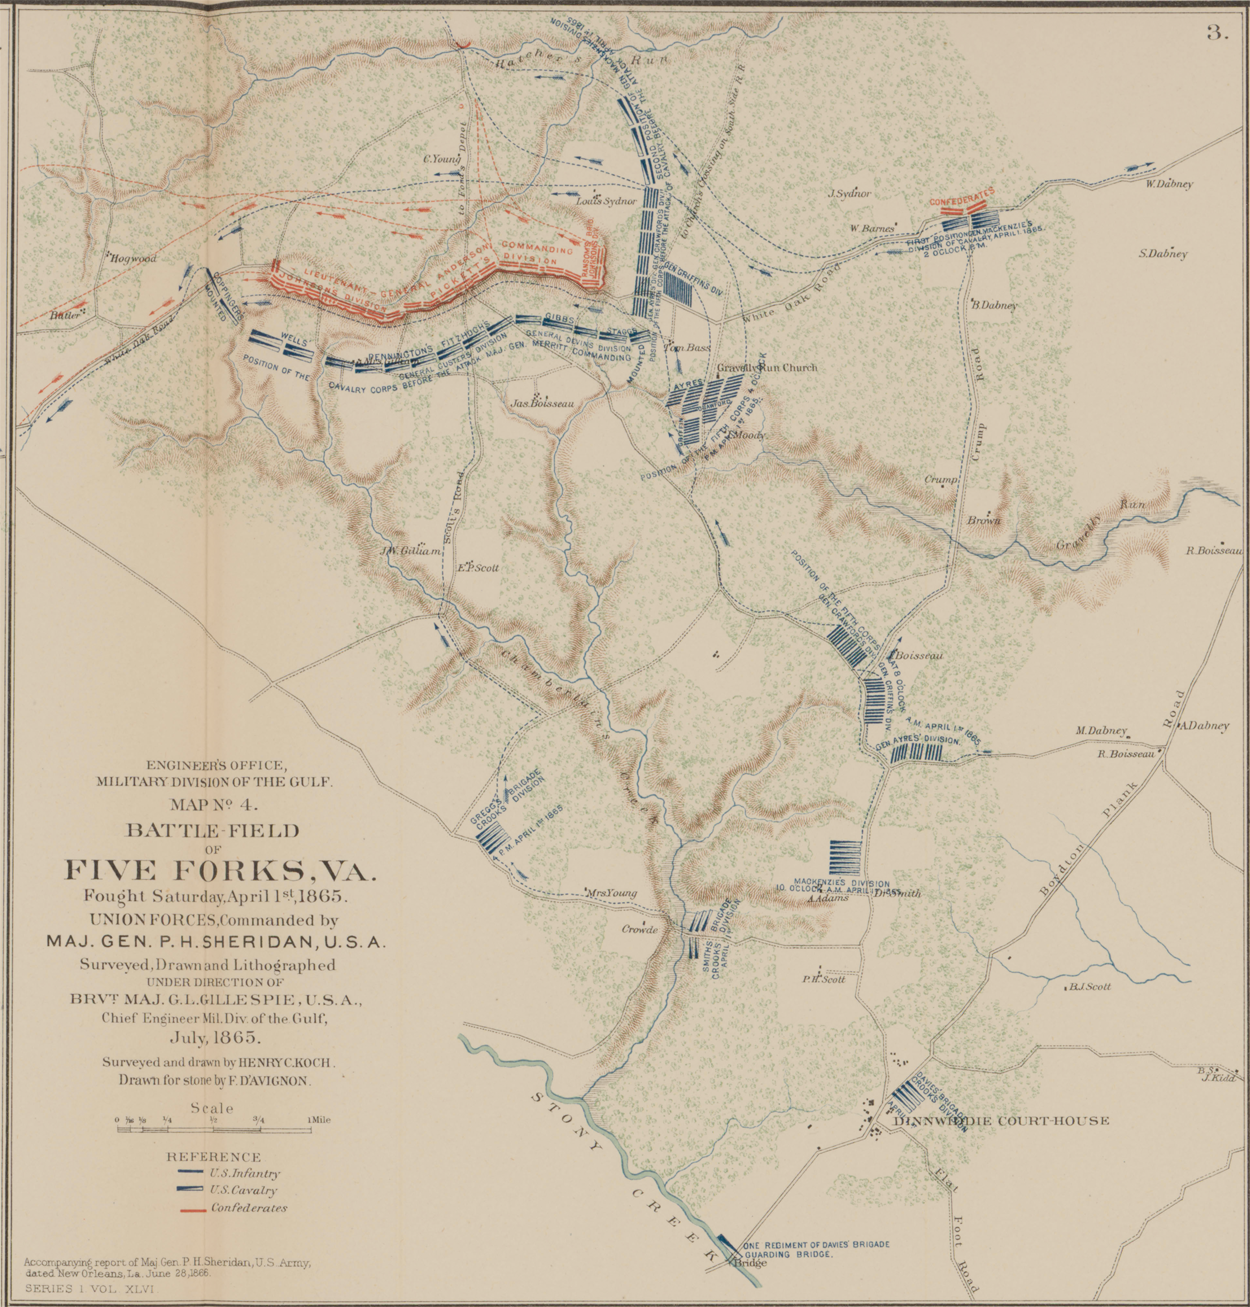 Map No. 4 Battle-Field of Five Forks Va. Fought Saturday April 1 1865 (OR Atlas 68:3)